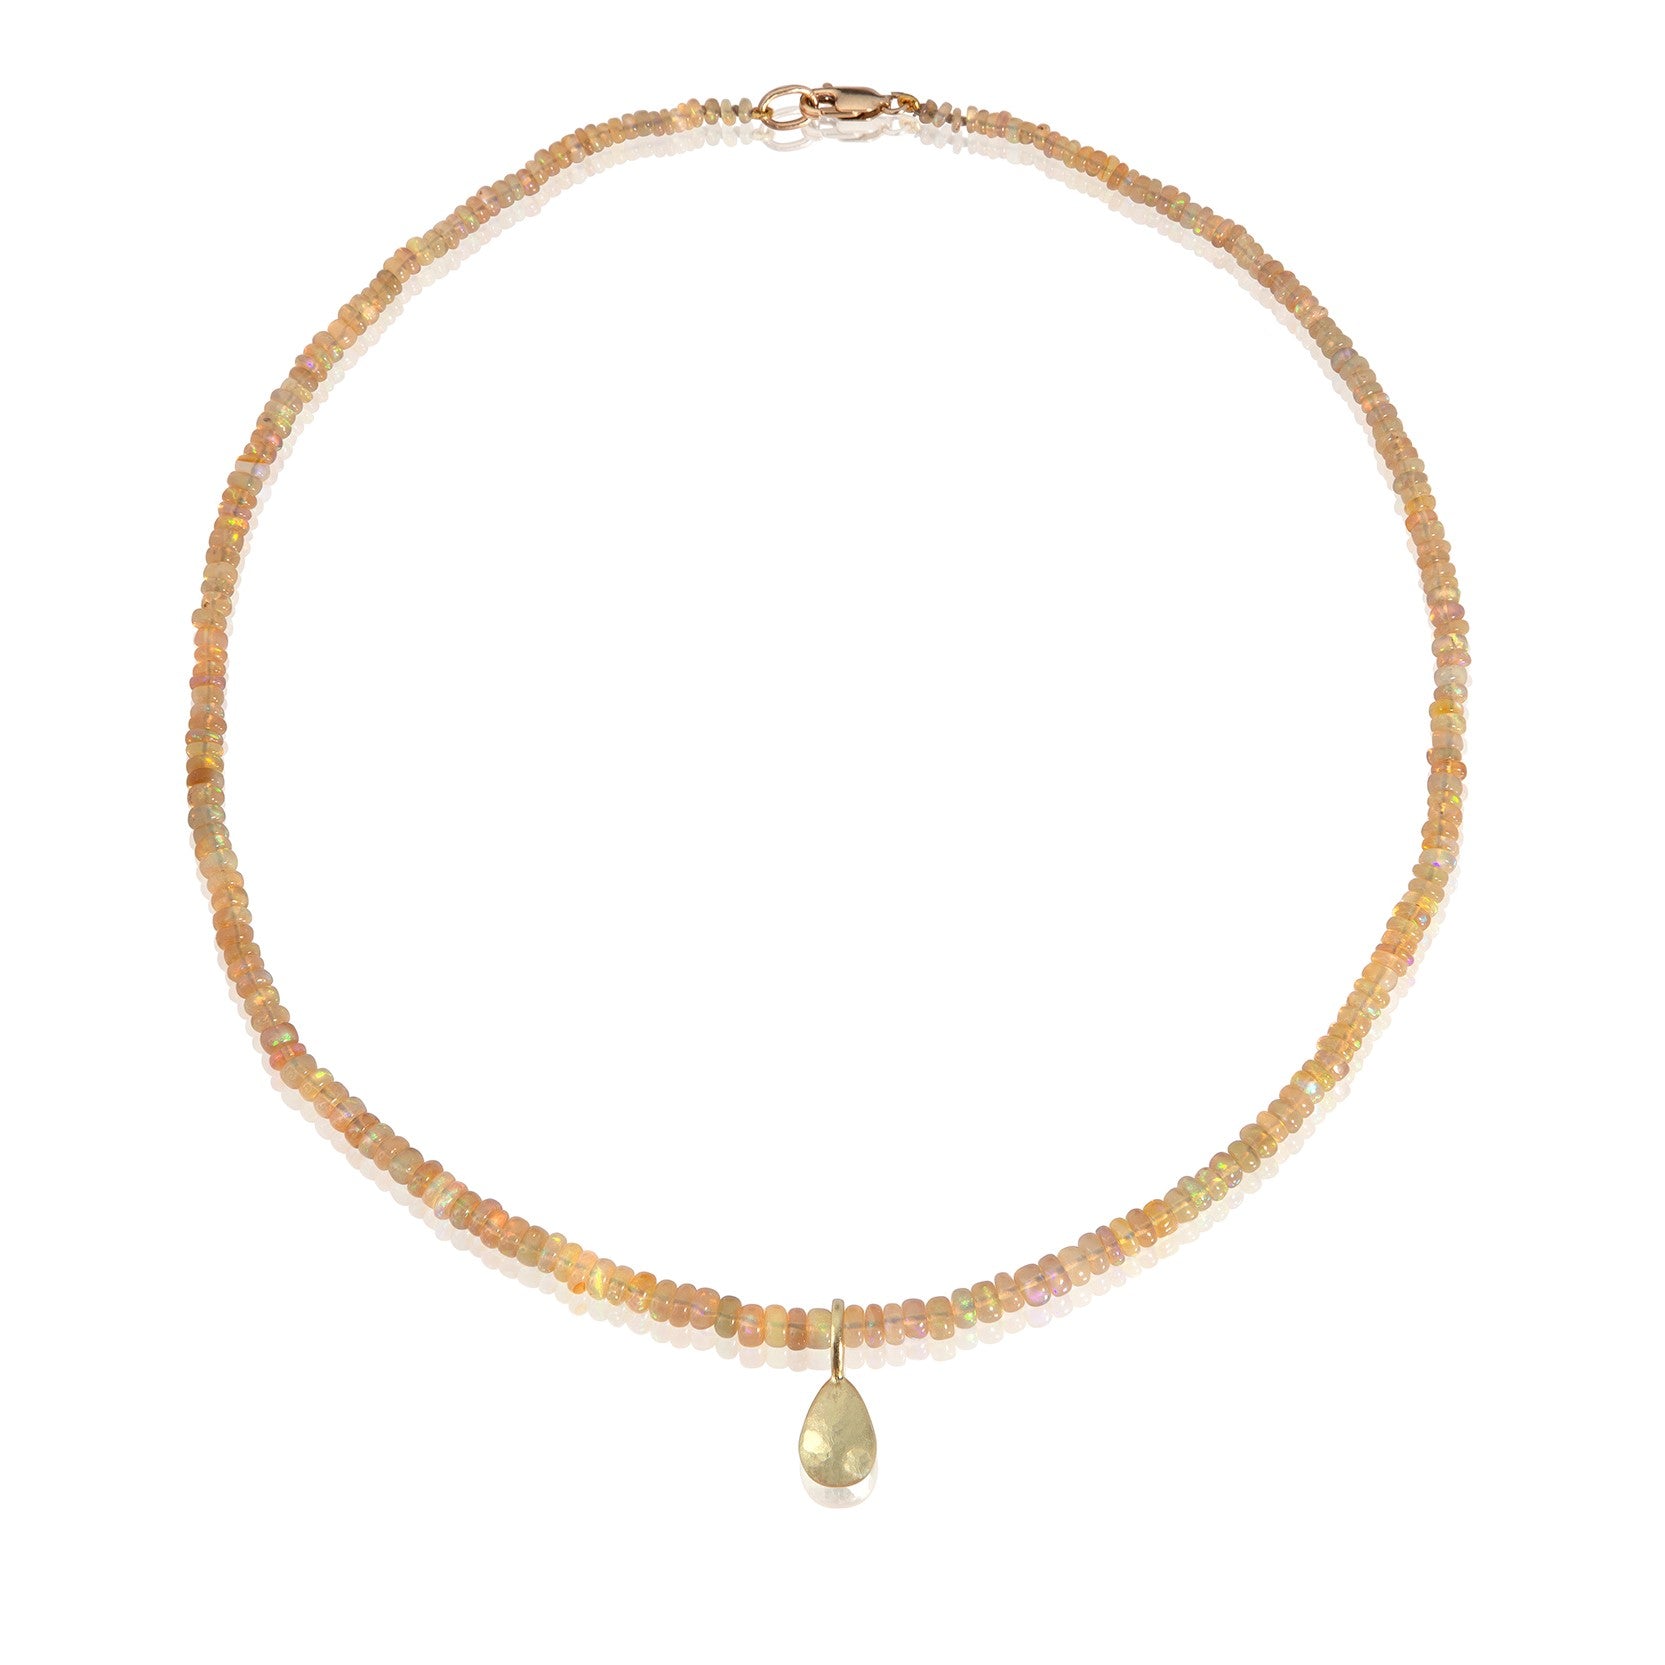 Yellow opal bead necklace with 18ct yellow gold detachable pendant